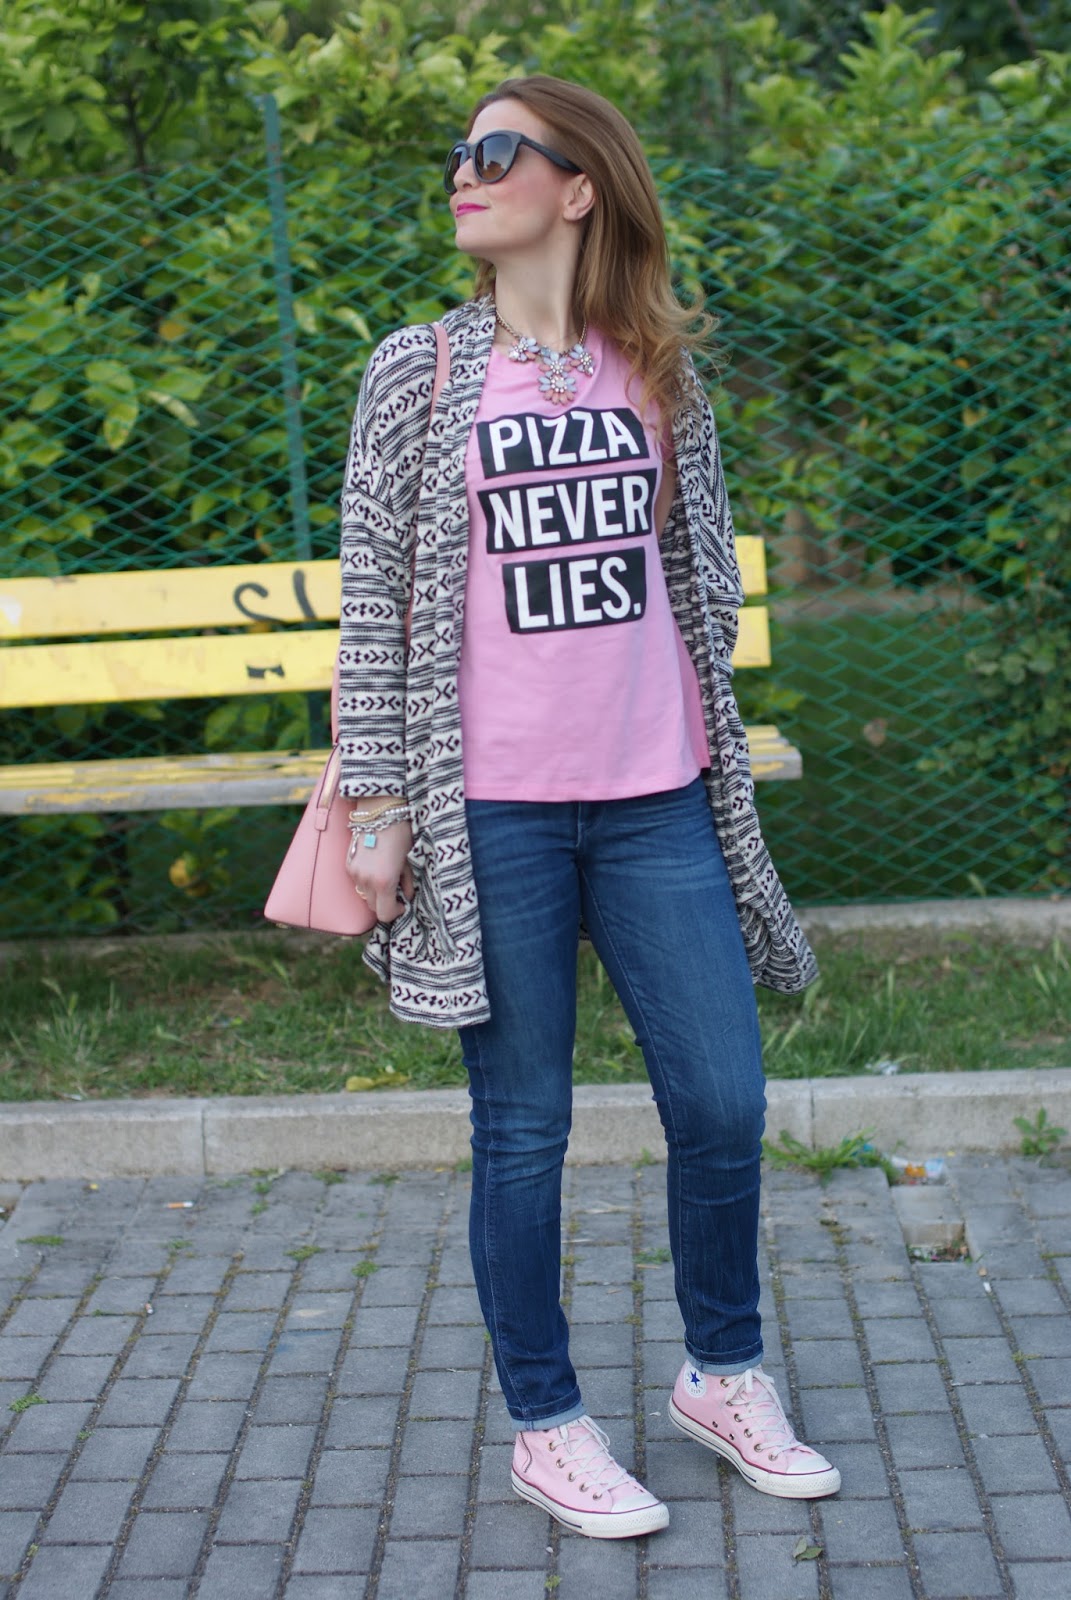 Pizza never lies, Zaful pink t-shirt, Zaful pizza never lies, casual pink look on Fashion and Cookies fashion blog, fashion blogger style